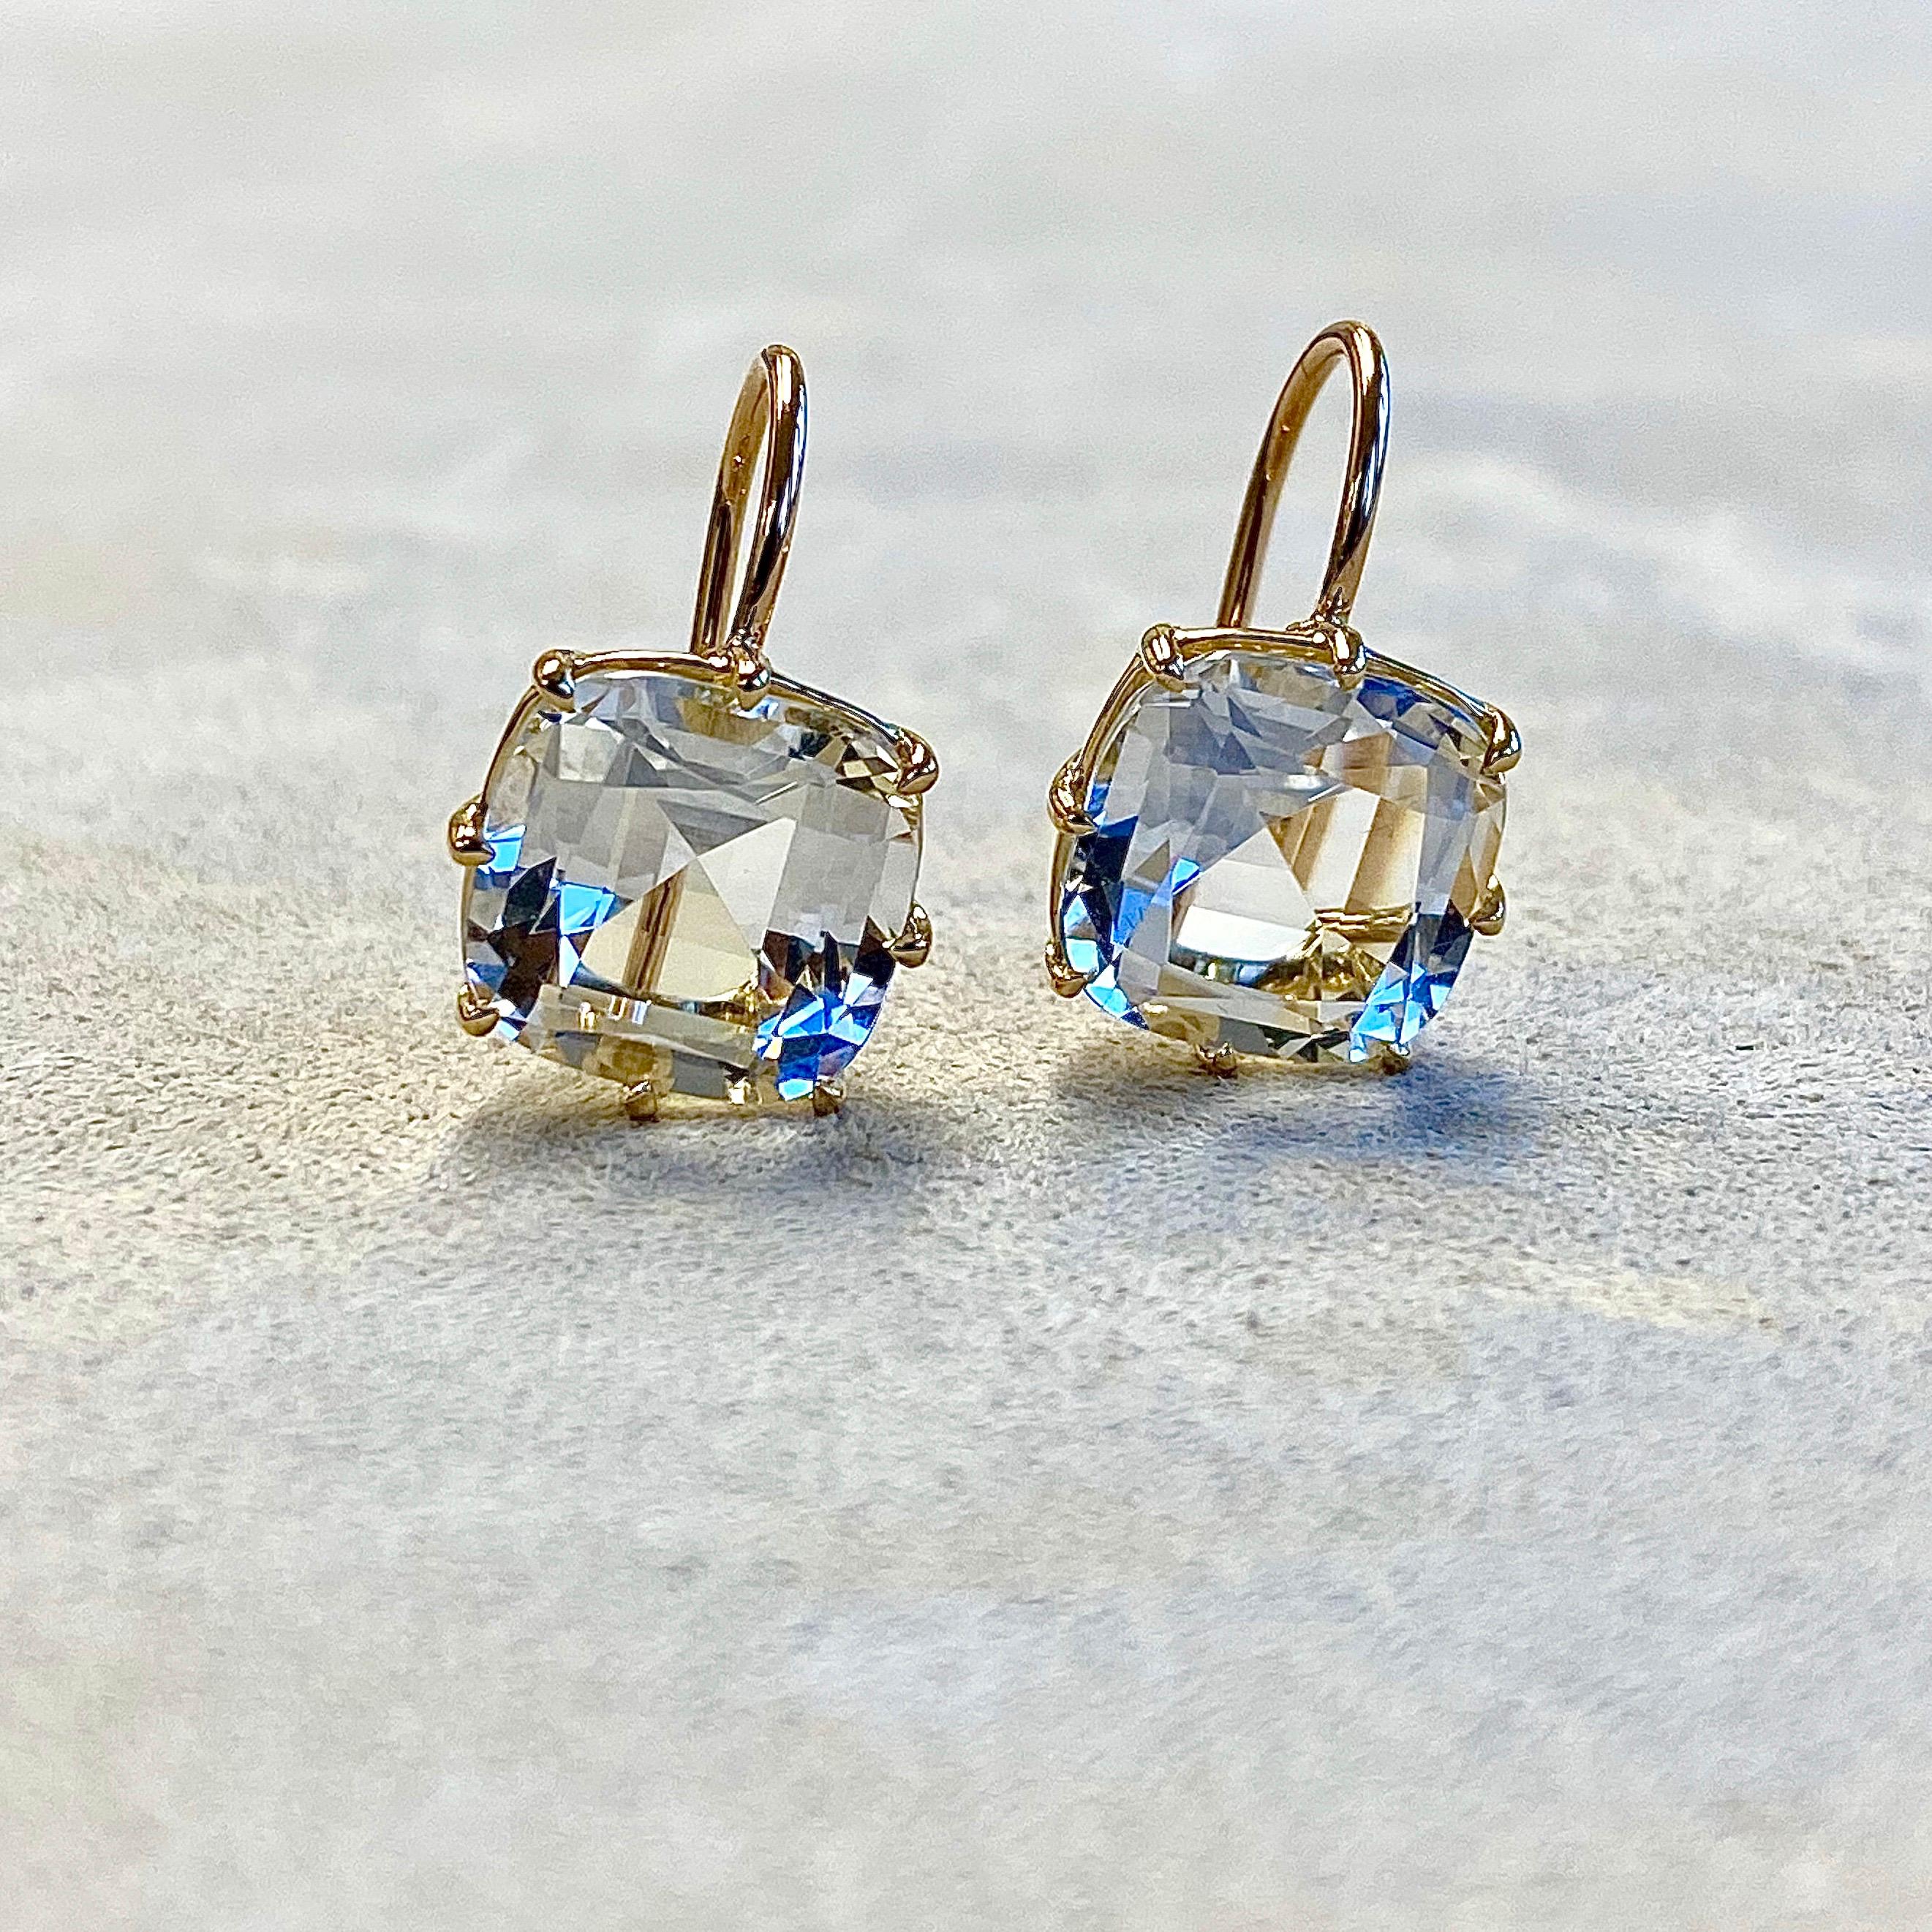 Created in 18 karat yellow gold
Rock Crystal 8 cts approx
Limited Edition

This luxurious limited edition pair of Candy Blue Topaz & Diamond Earrings is crafted with 18 karat yellow gold and the distinctive brilliance of Rock Crystal, totaling 8 cts